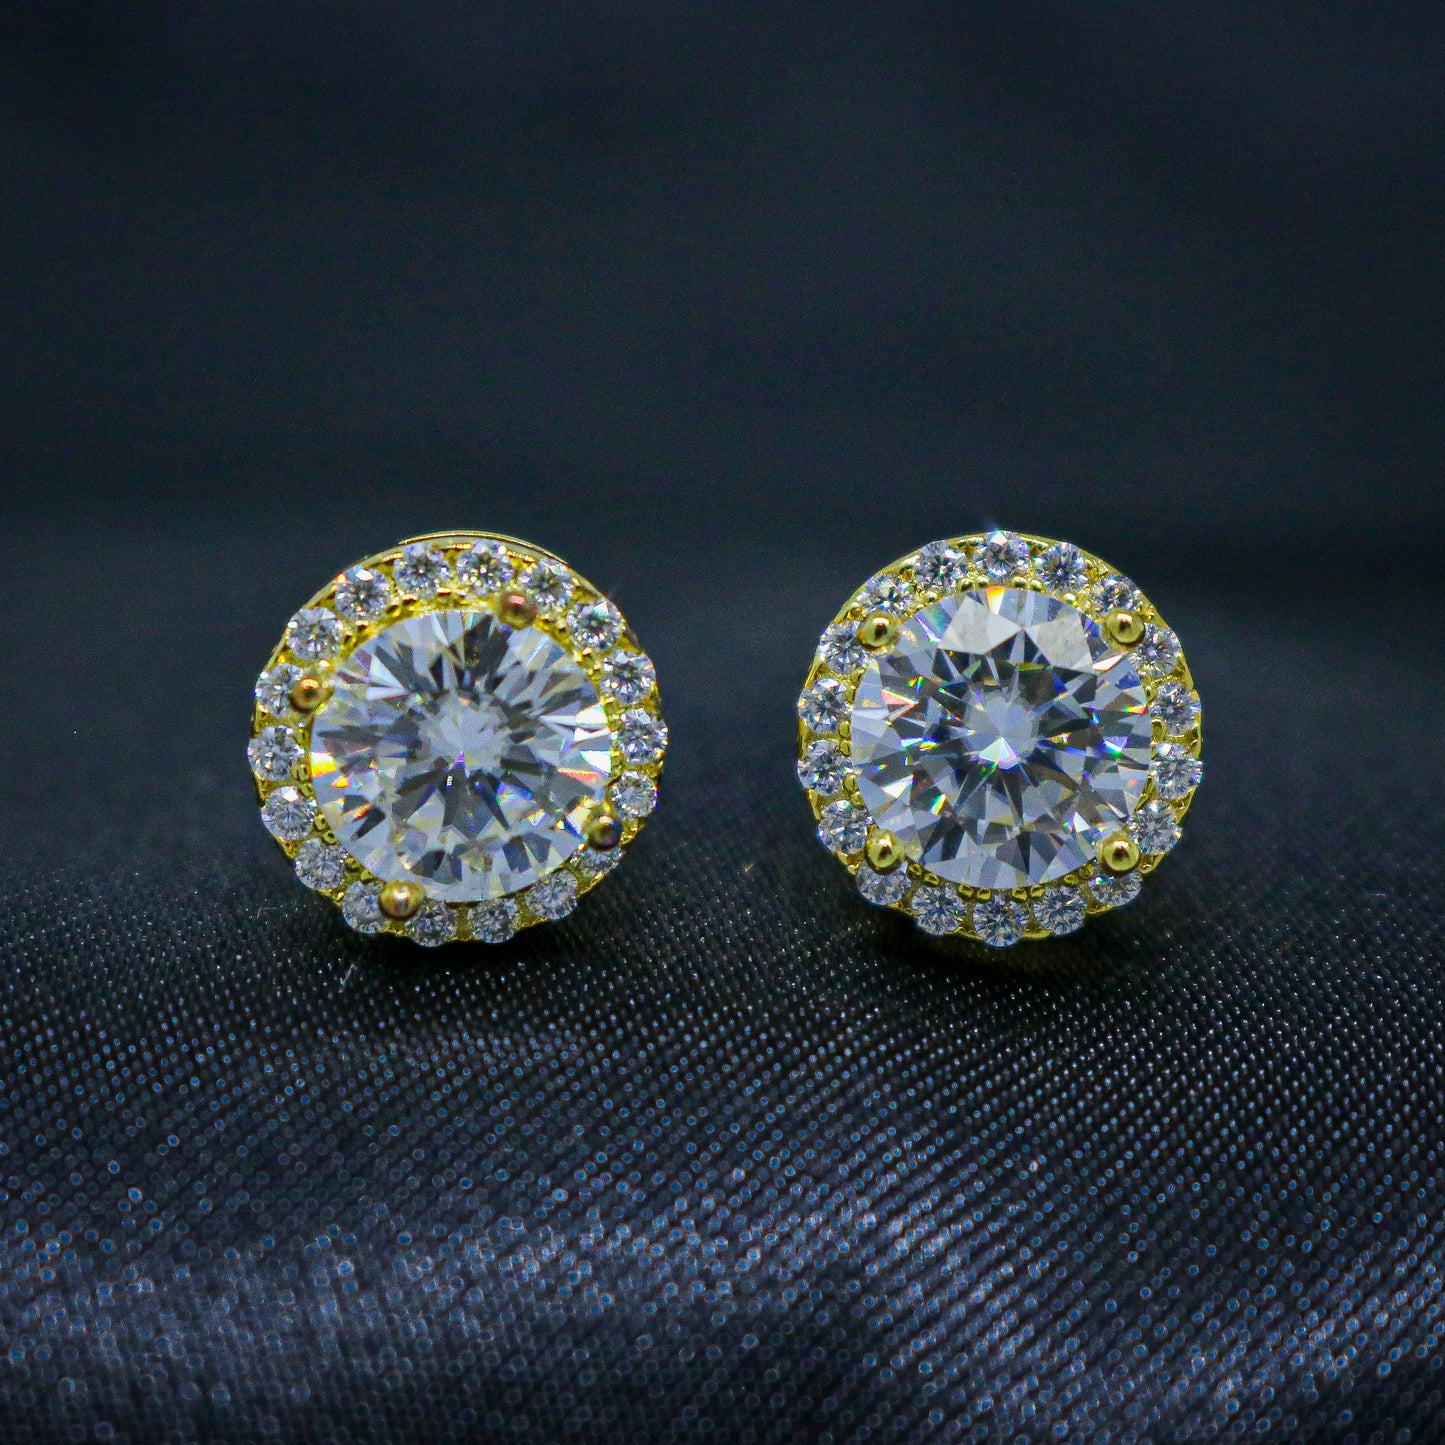 VVS Moissanite Halo 9mm Round Cut Stud Earrings - Gold over 925 Silver